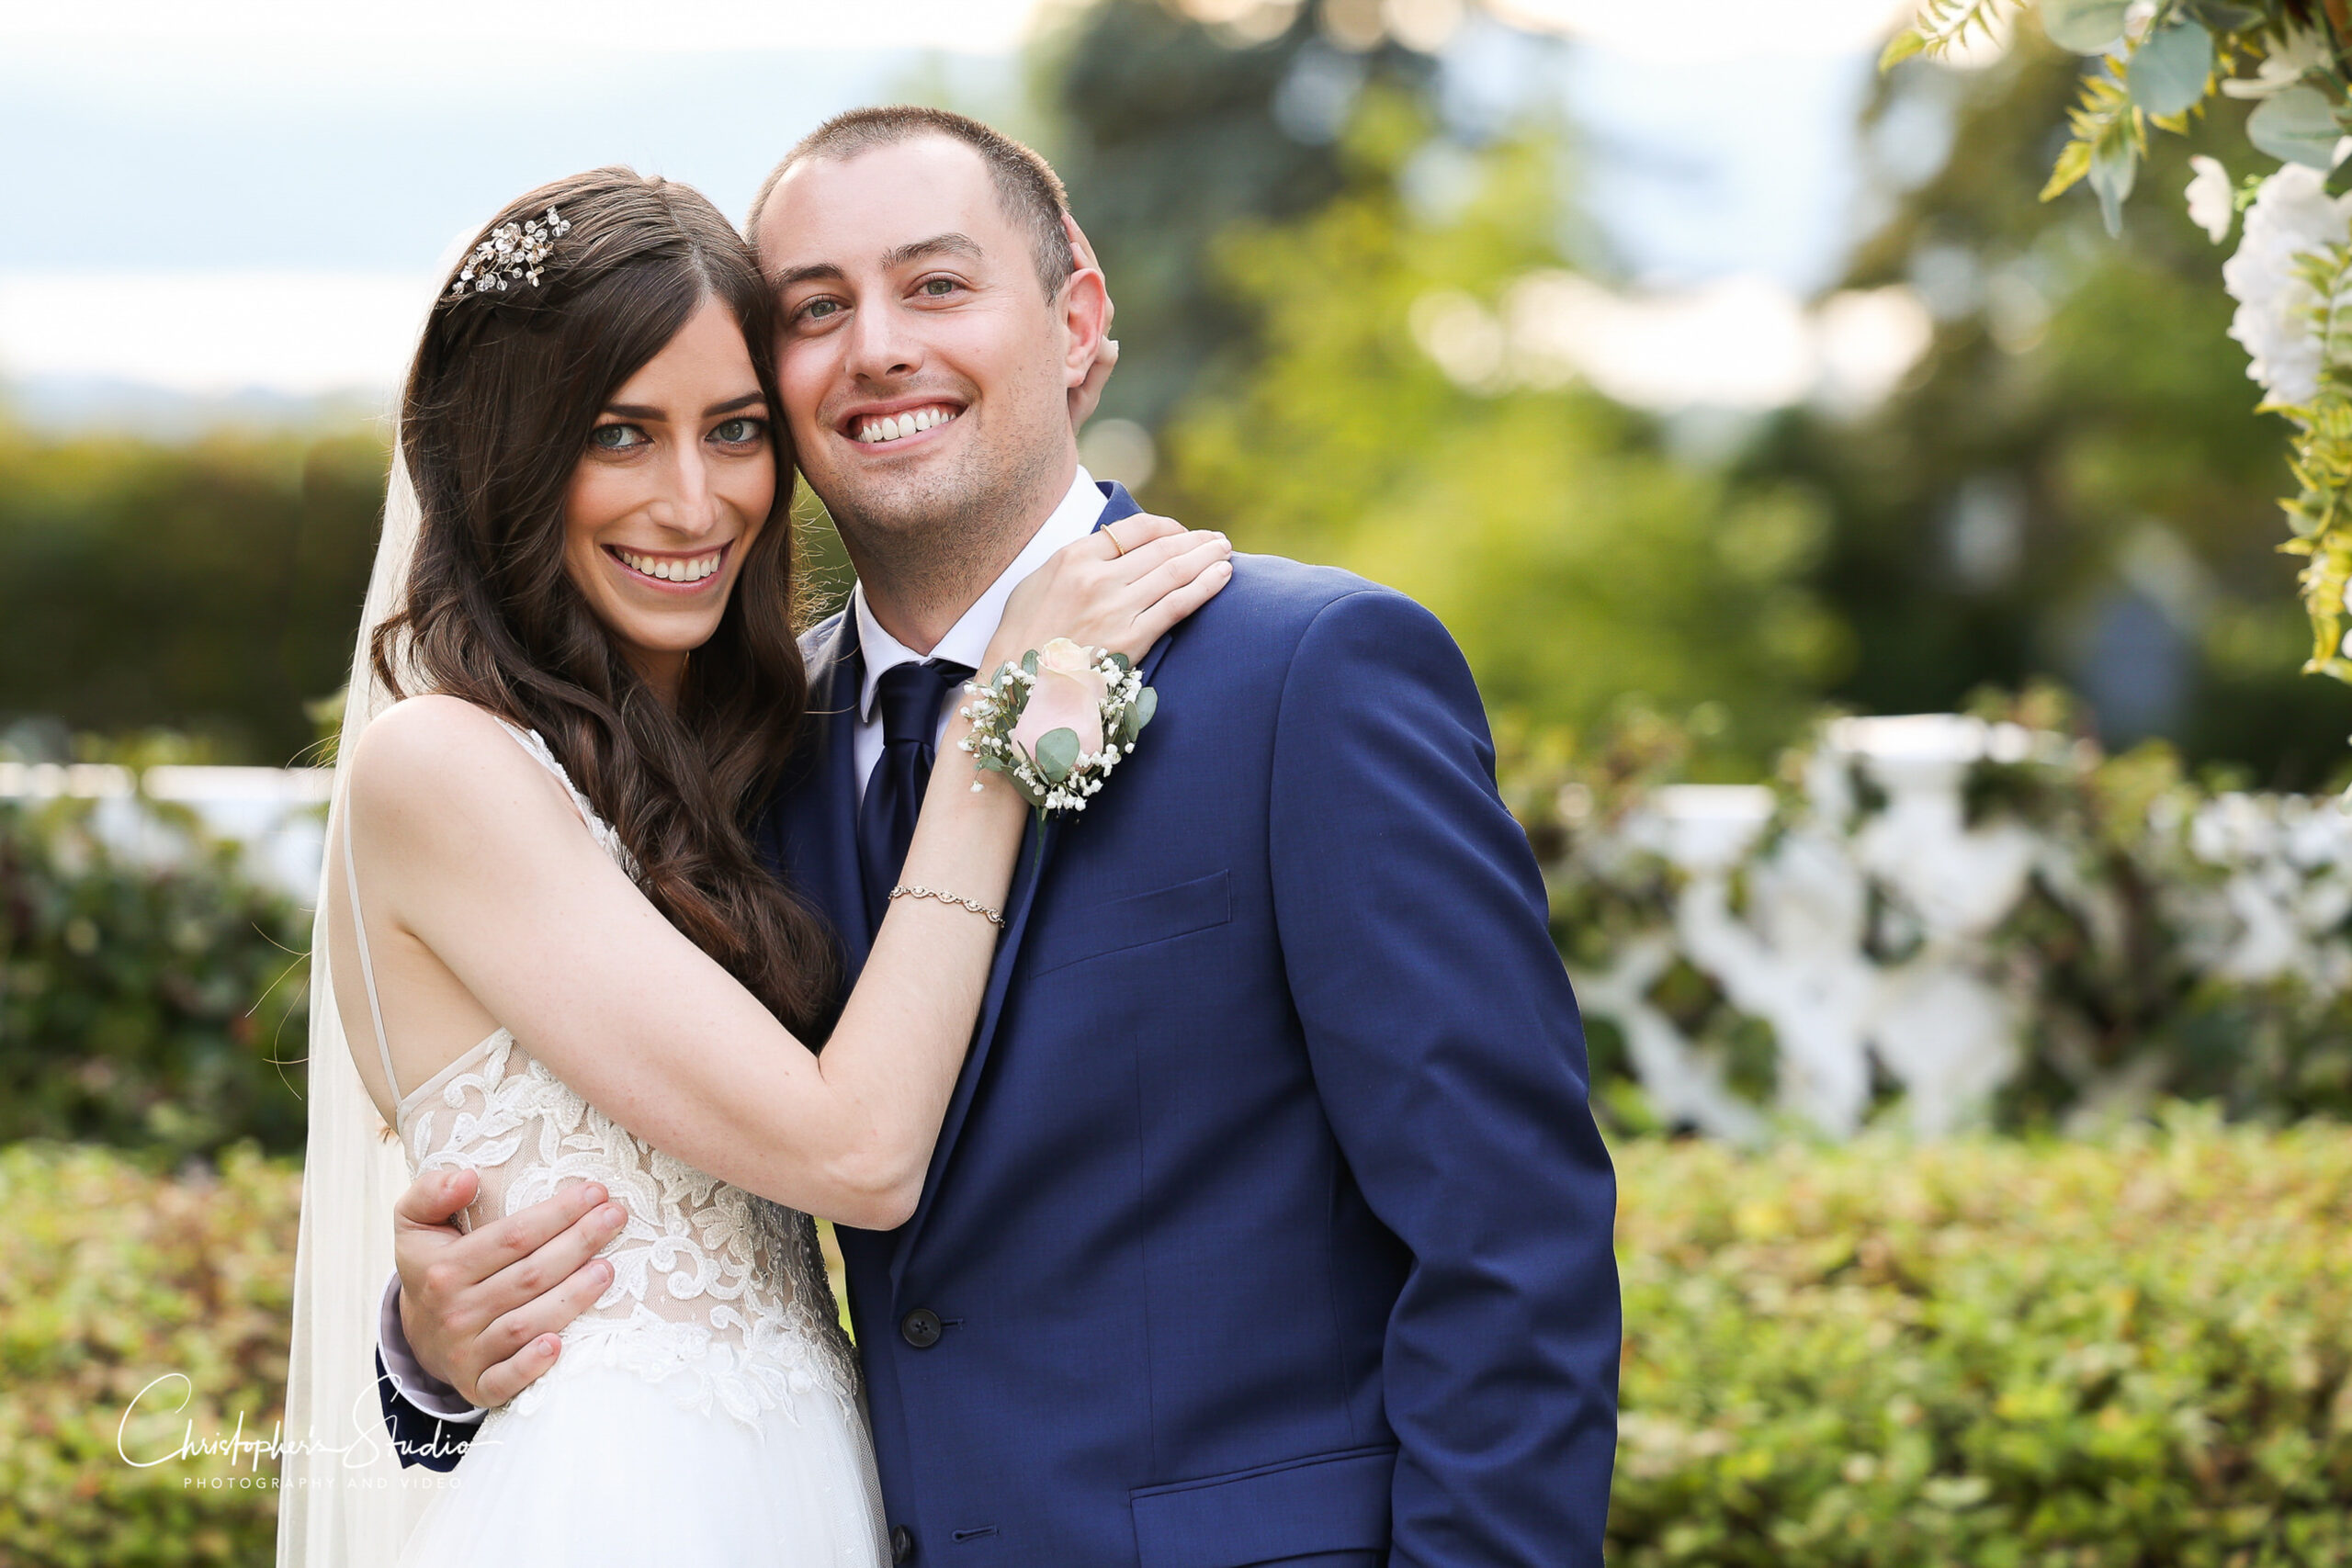 Bride and Groom smiling for photos at The Briarcliff Manor wedding venue.